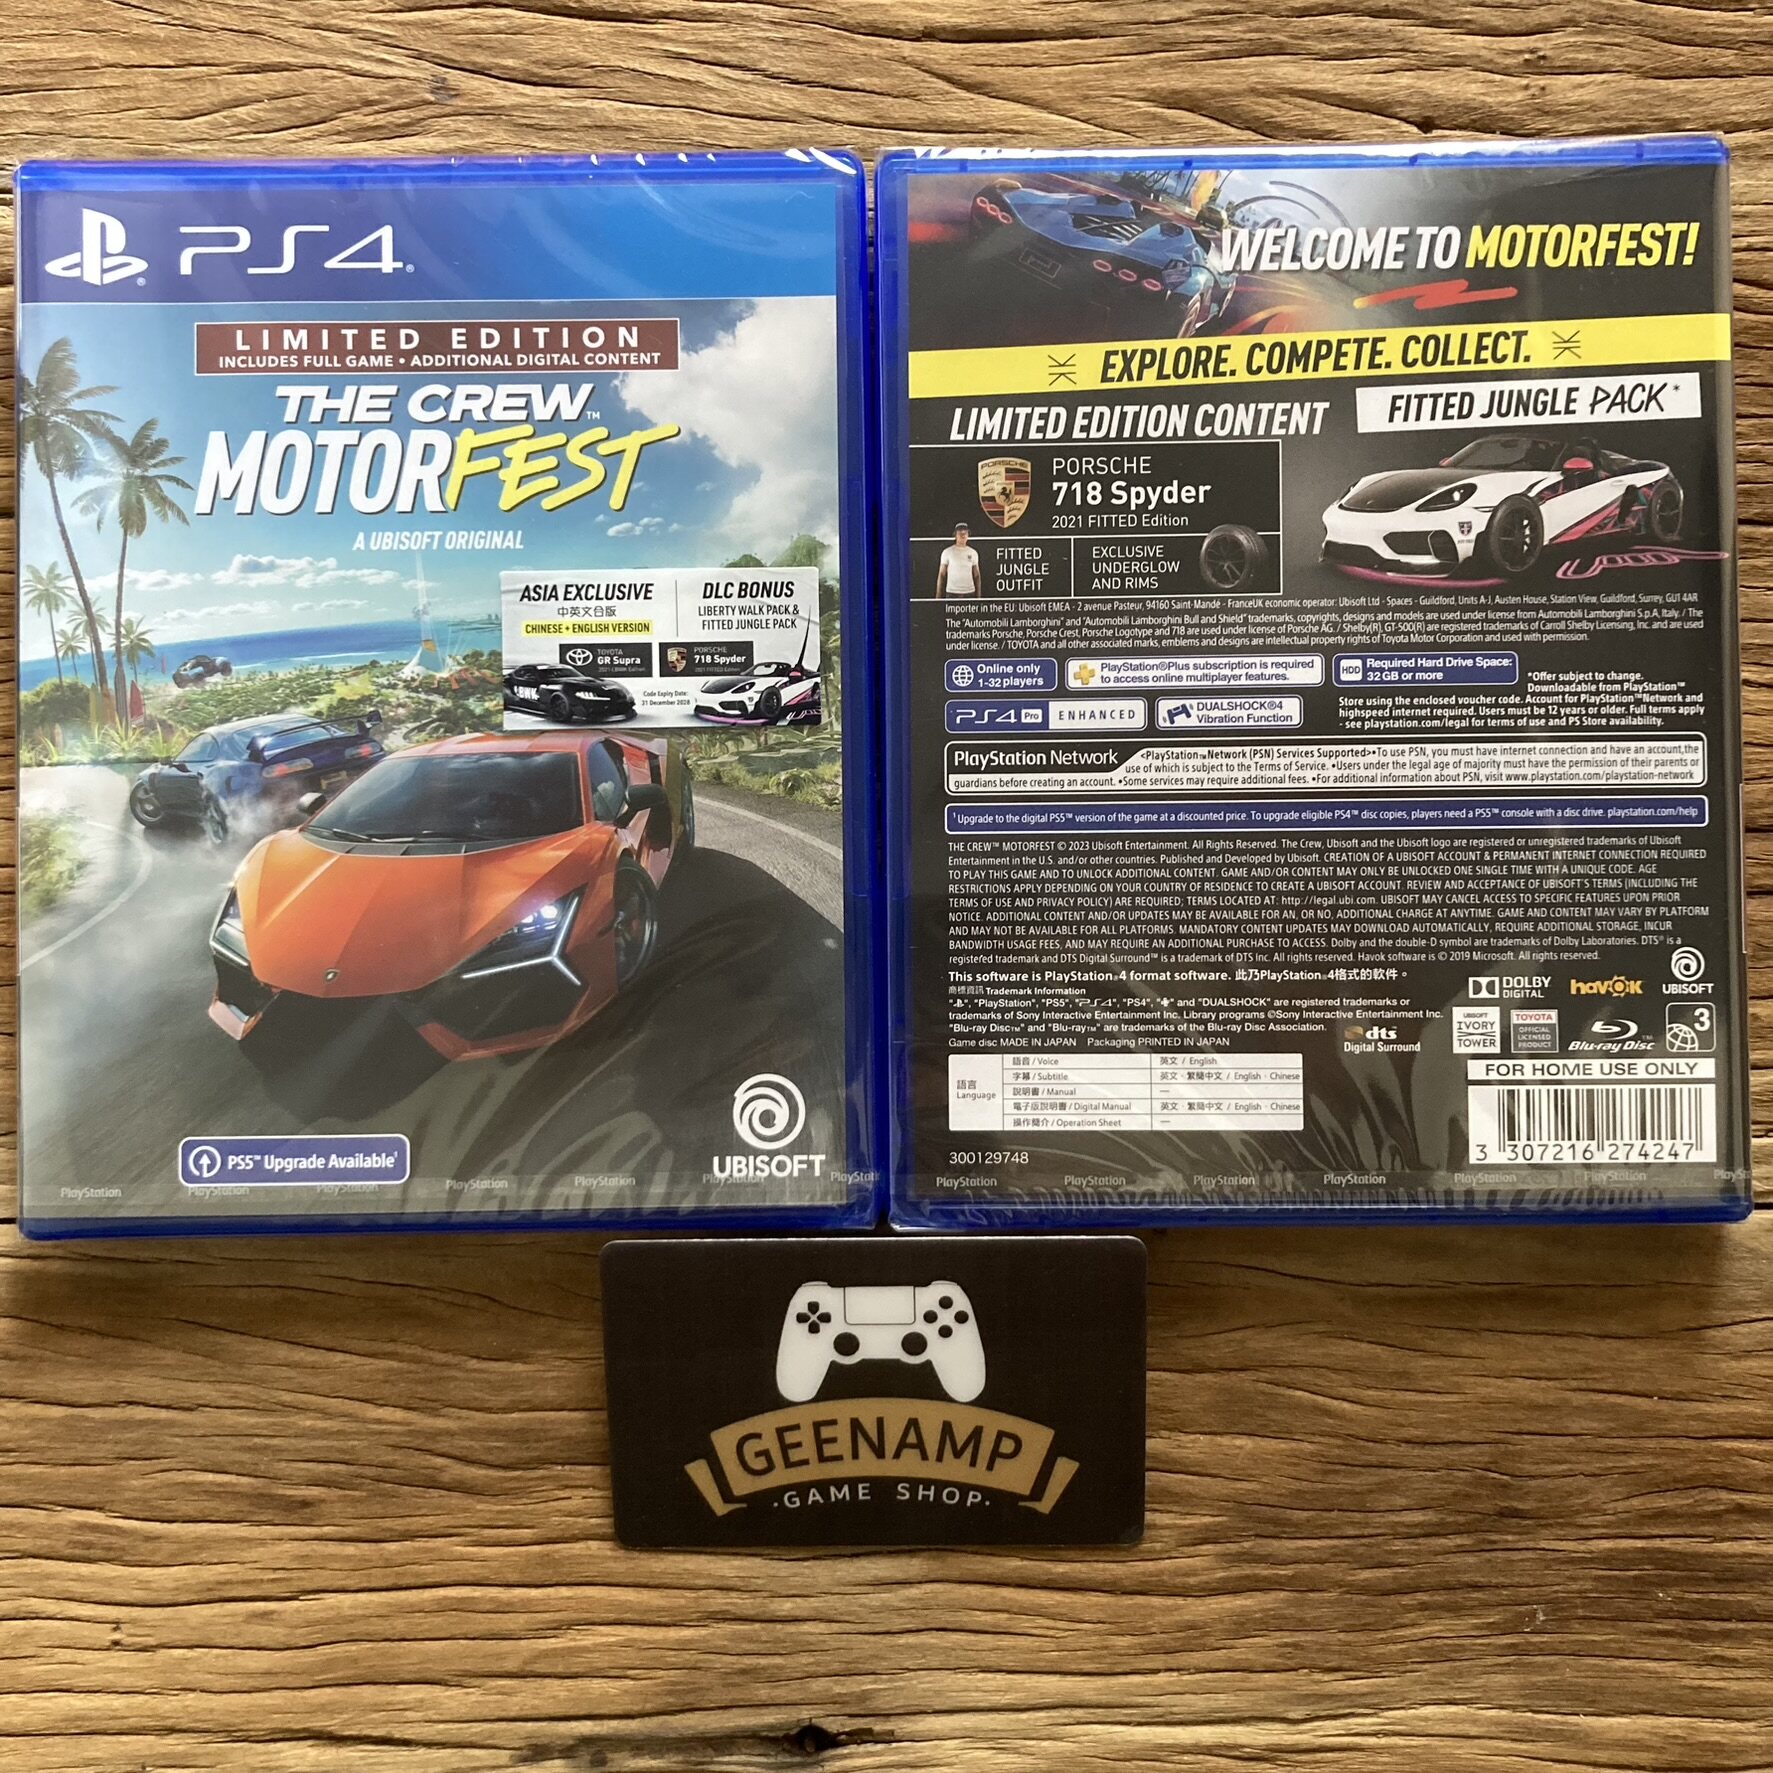 ETA-Games 🎮 on Instagram: New Arrival - The Crew Motorfest Limited  Edition (Asia) PS5 - $96 (Member $86) PS4 - $84 (Member $74)